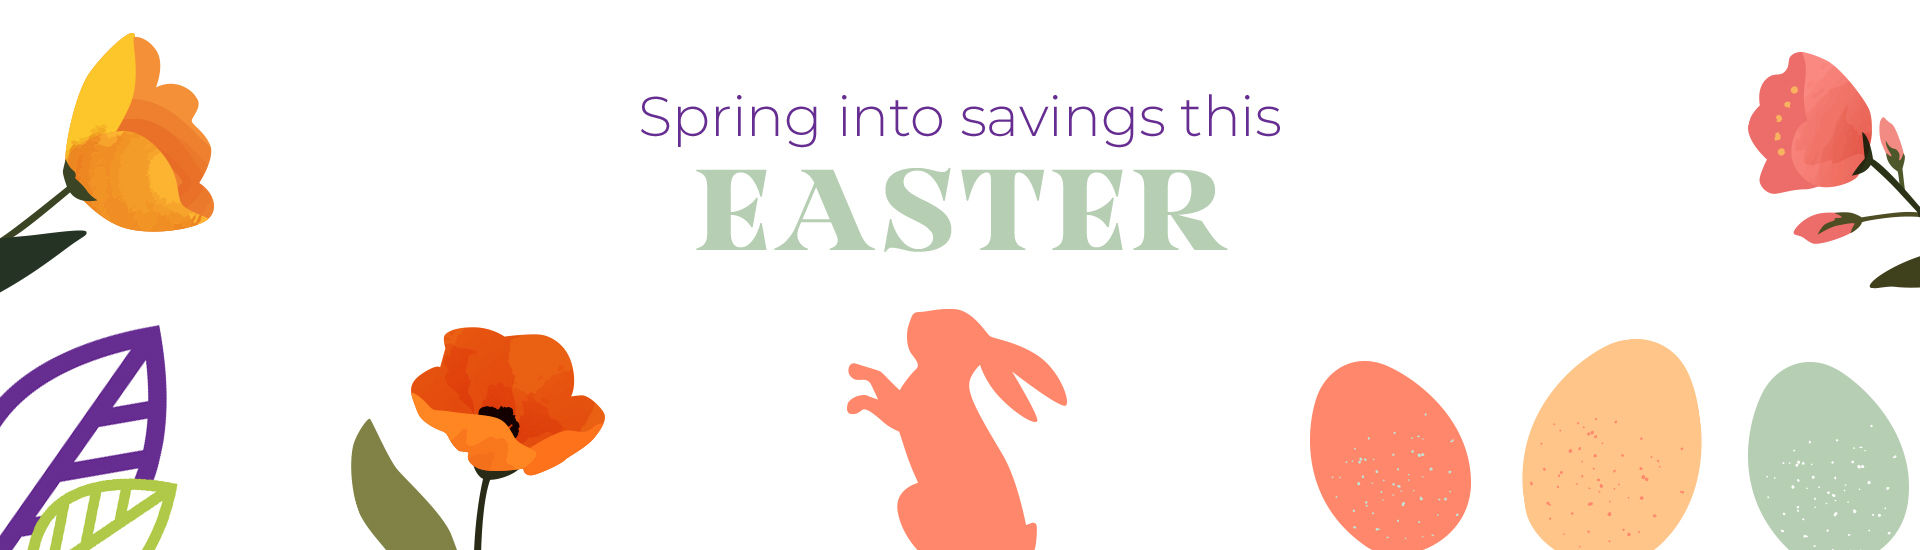 Spring into savings this Easter